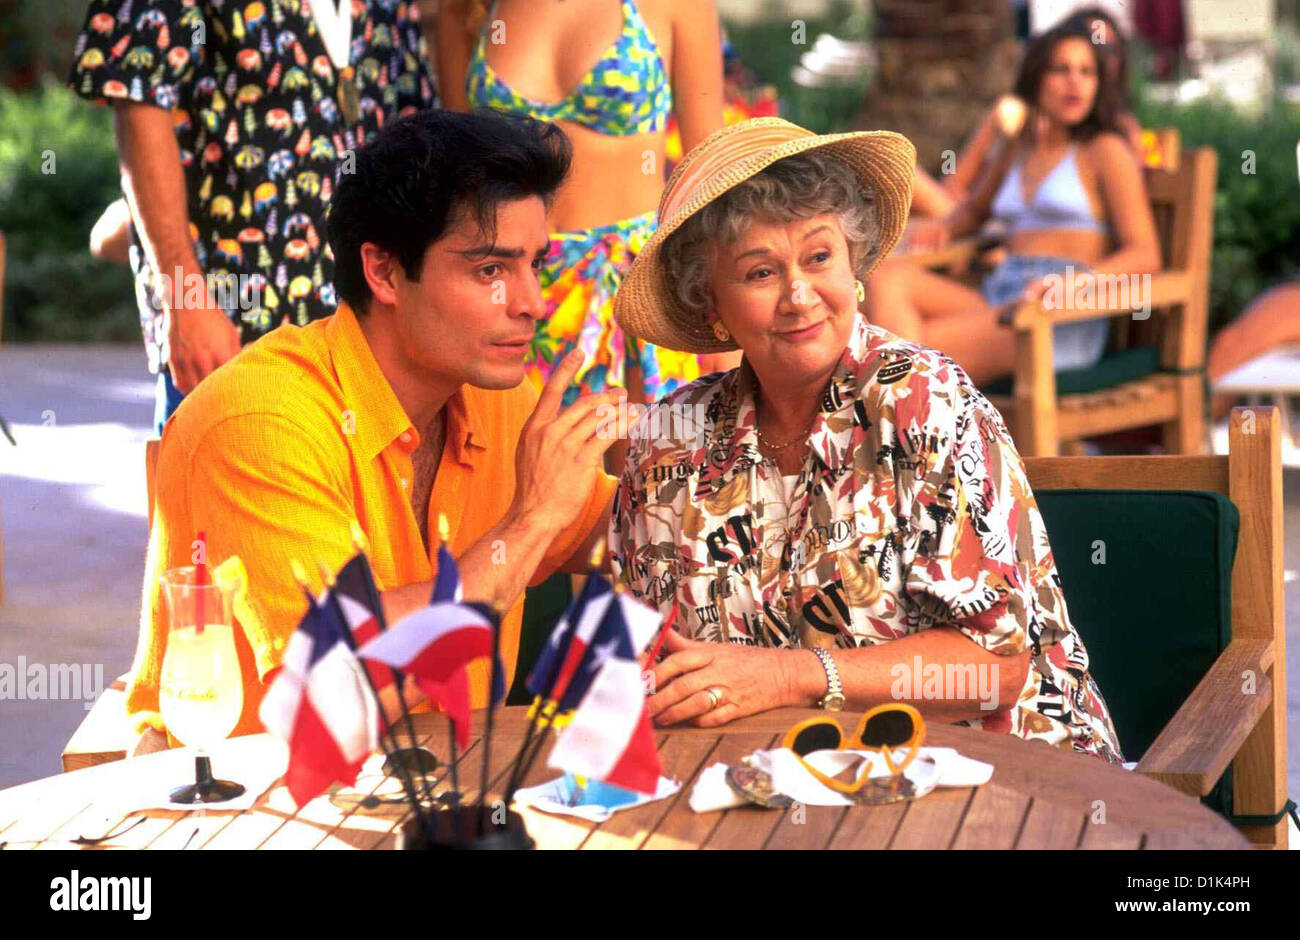 Dance Me Dance Me Chayanne, Joan Plowright Rafael (Carlos), Bea (Joan Plowright) *** légende locale *** 1998 Columbia / Banque D'Images